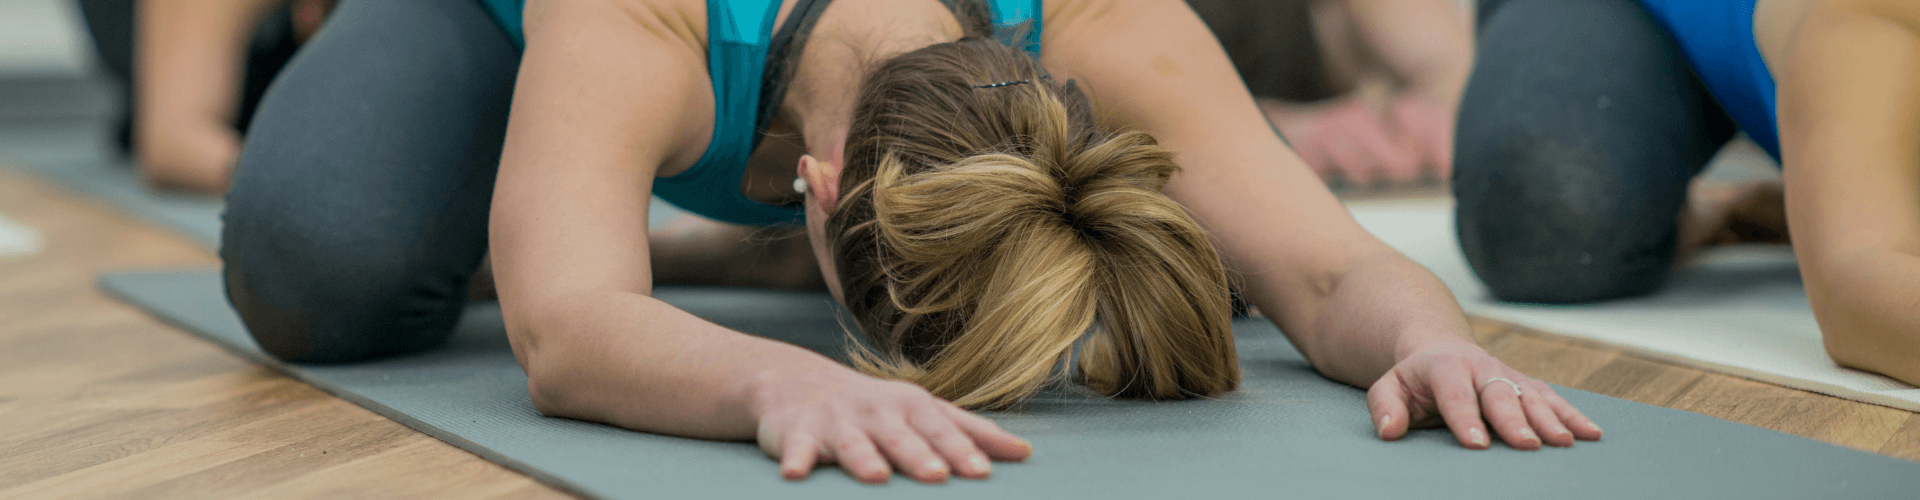 Yoga for migraine: Evidence, poses, and more